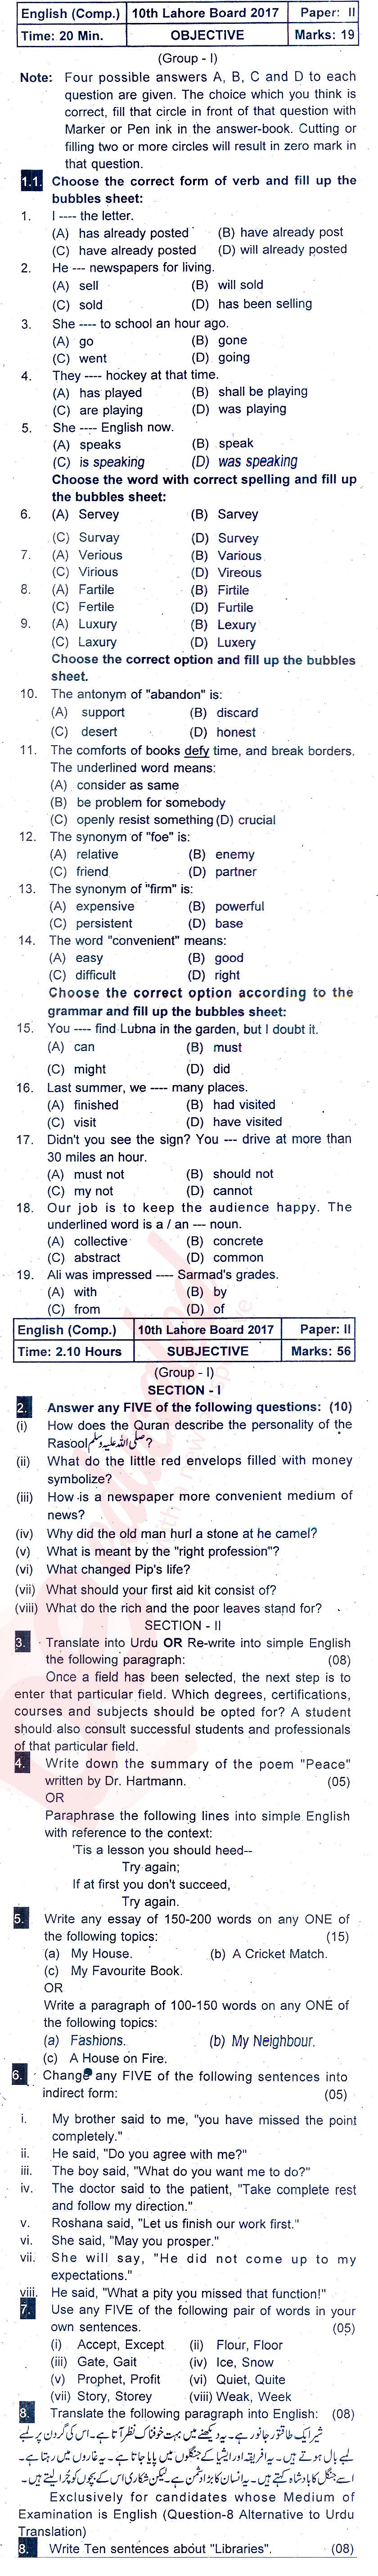 English 10th class Past Paper Group 1 BISE Lahore 2017